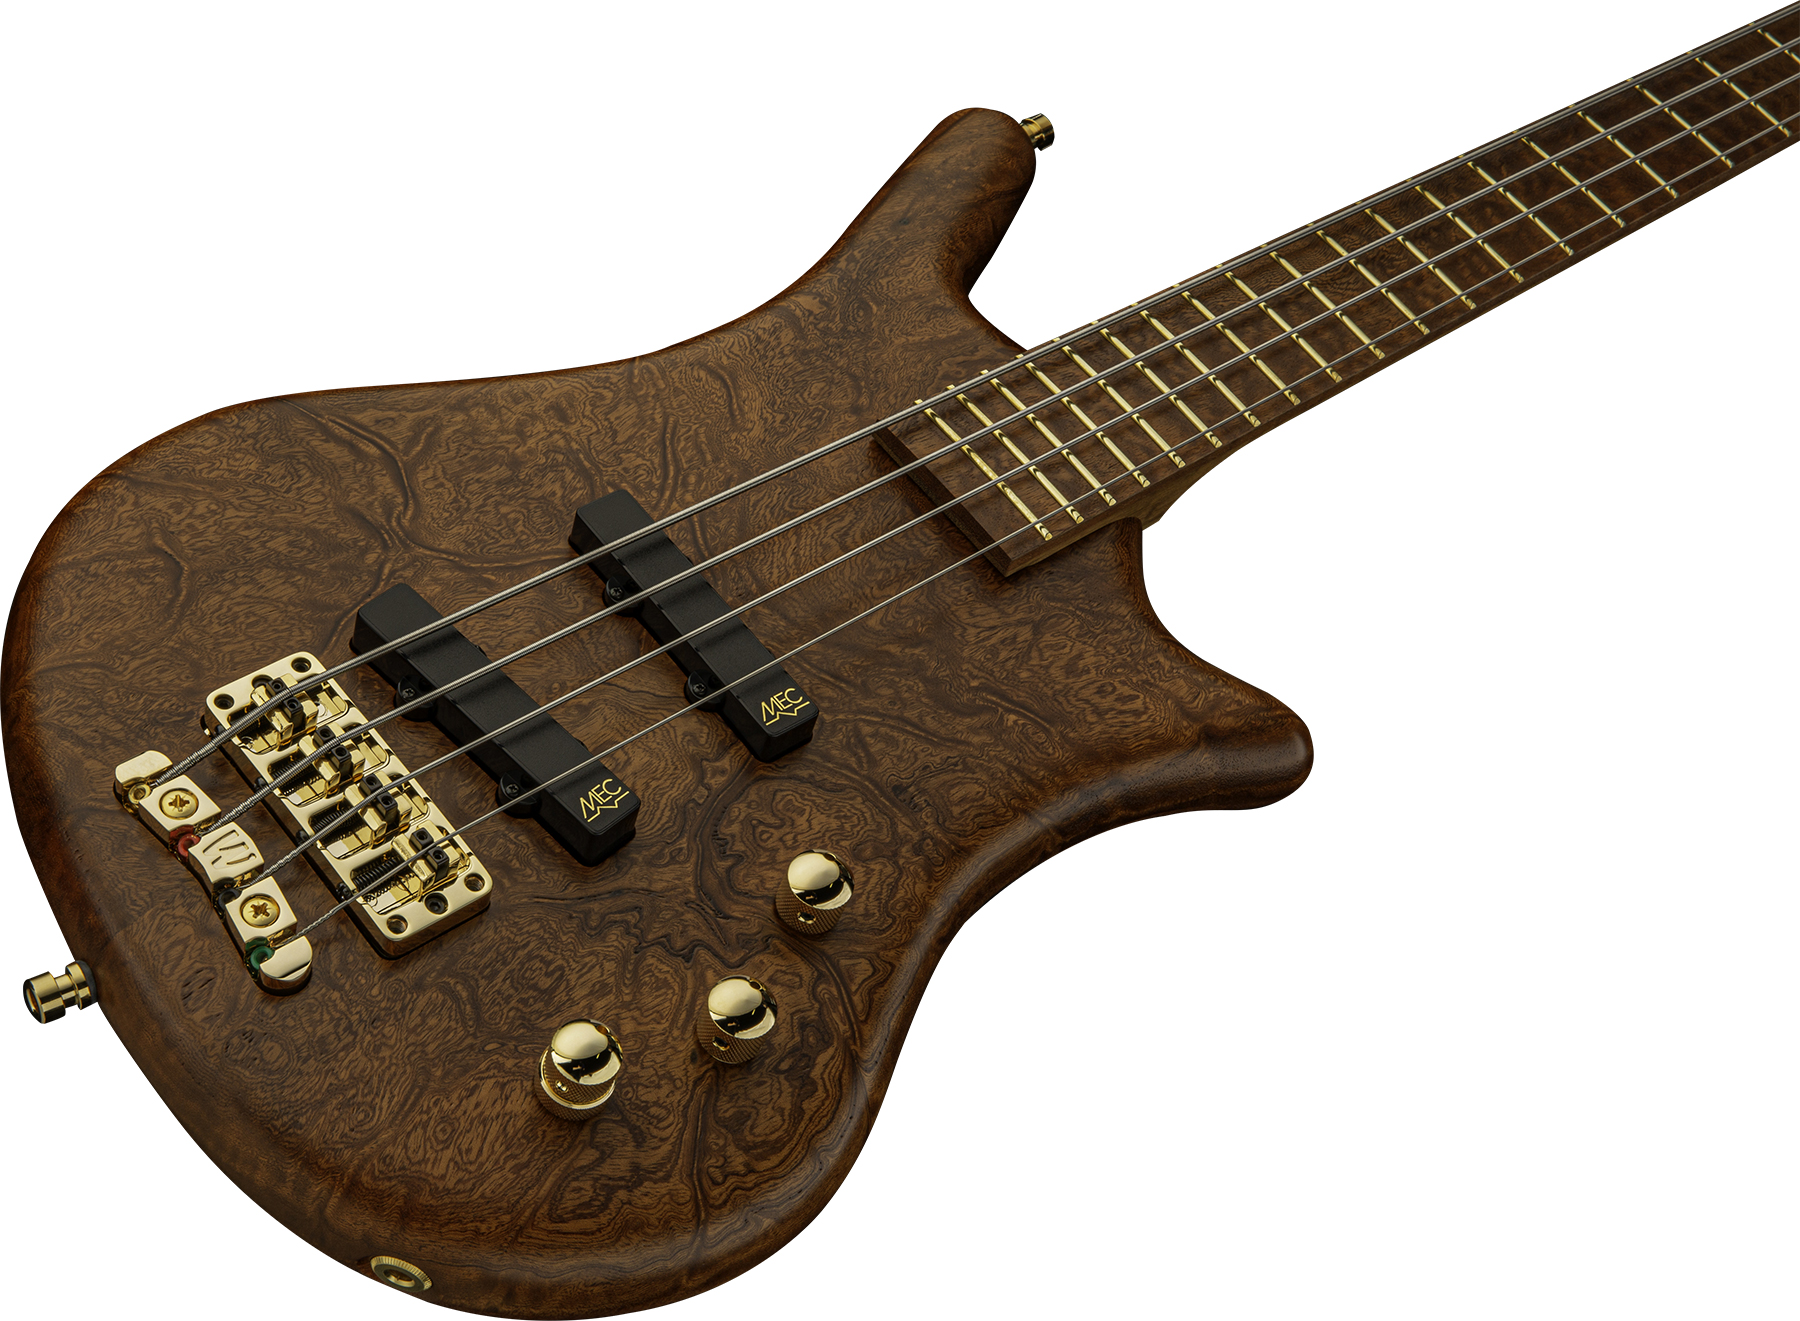 Warwick Thumb Bo 4c Pro Gps All Active Aca Gh - Natural Satin - Basse Électrique Solid Body - Variation 2